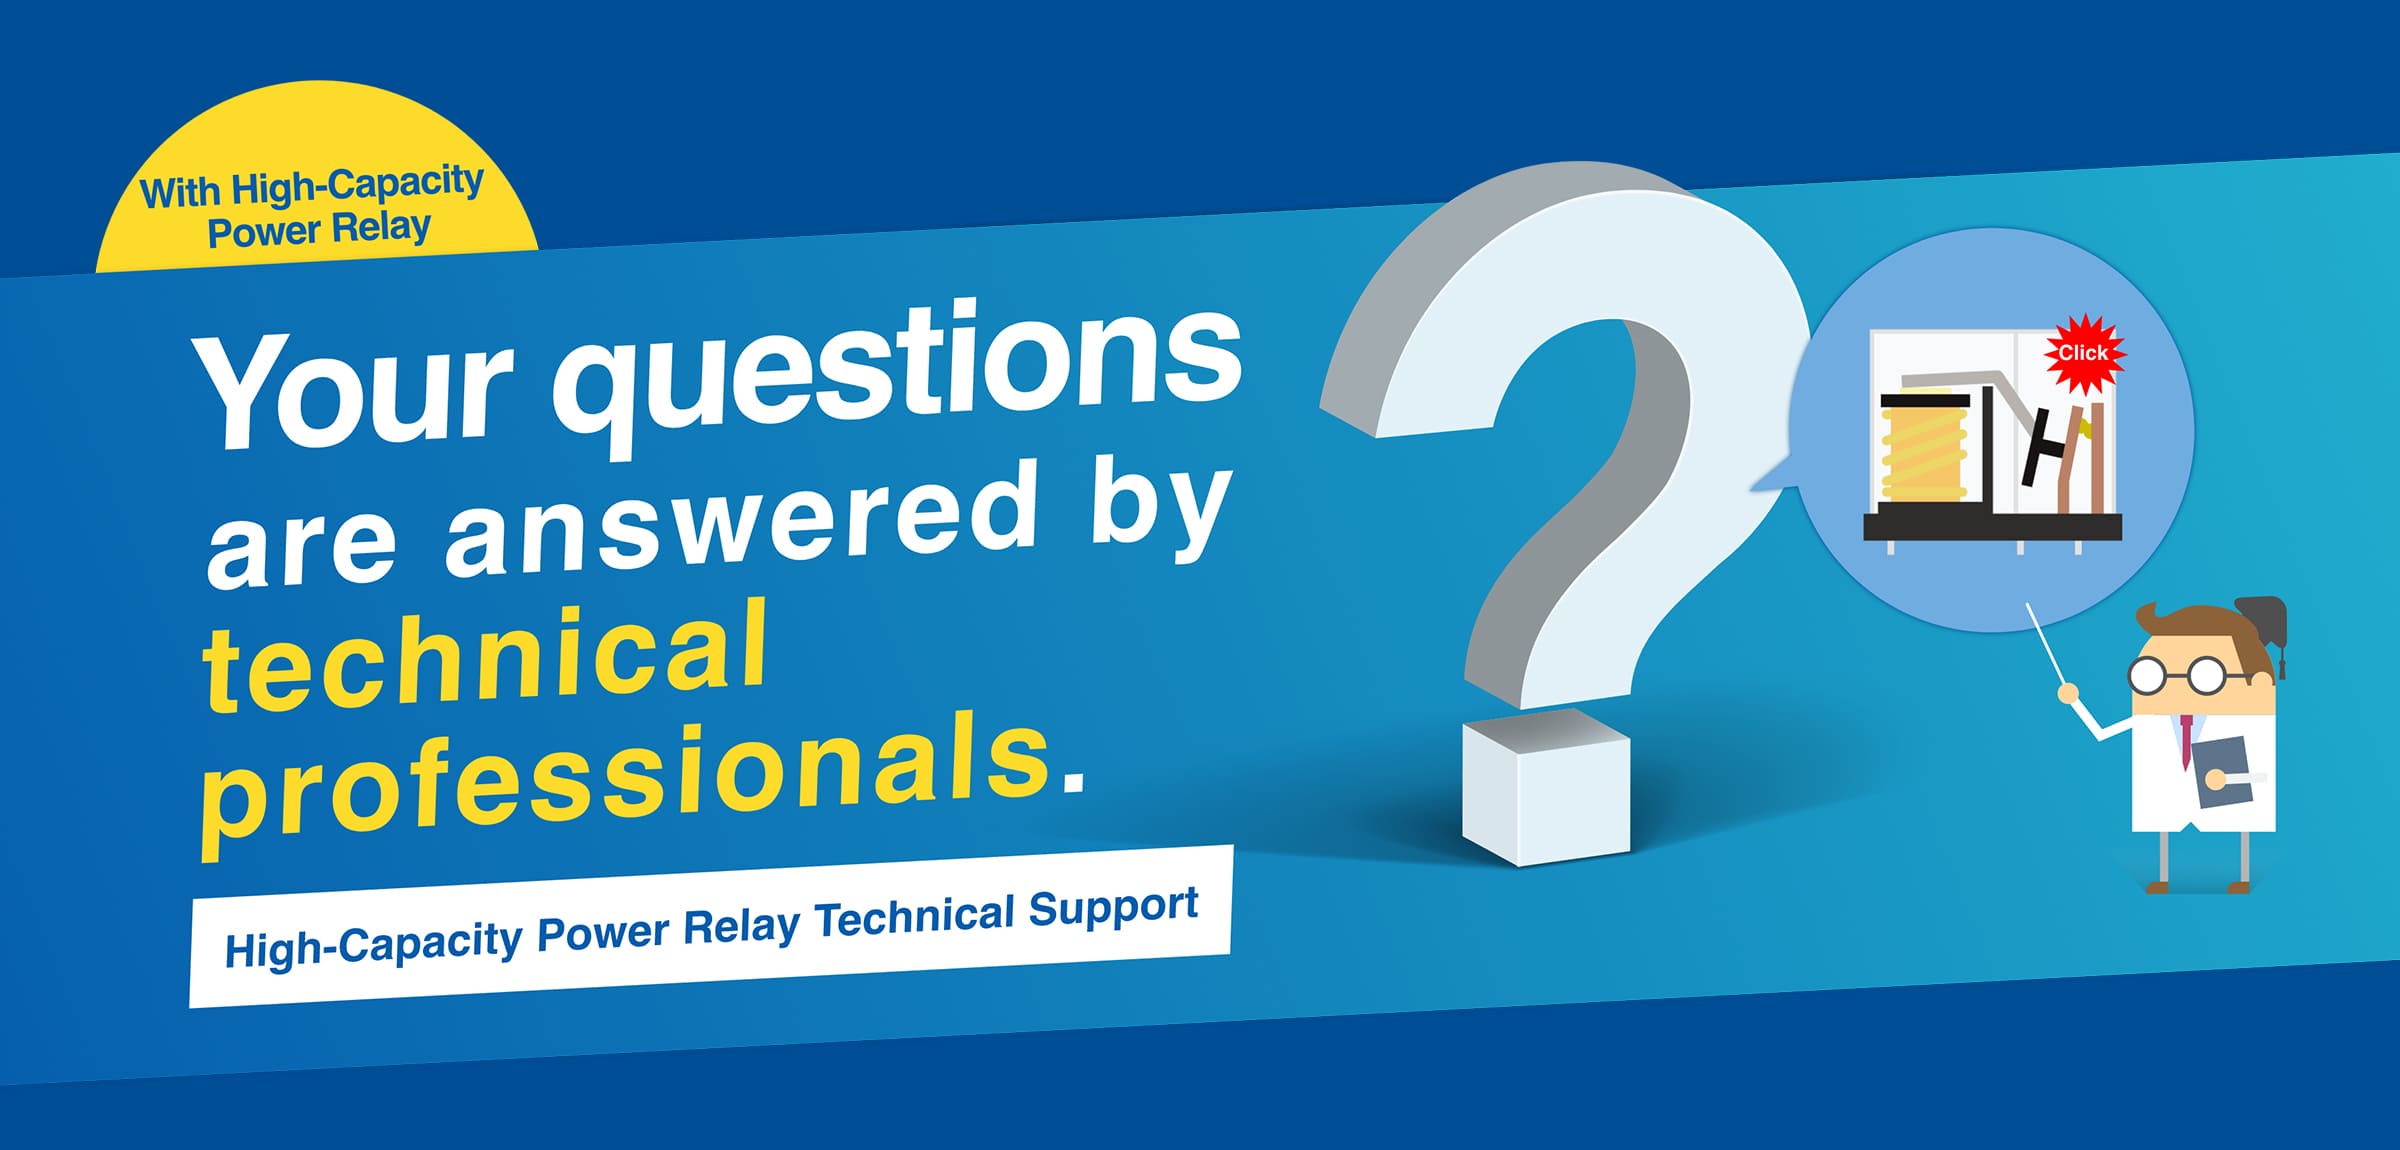 Technical professionals provide easy-to-understand explanations of the unknowns when using high-capacity power relays.